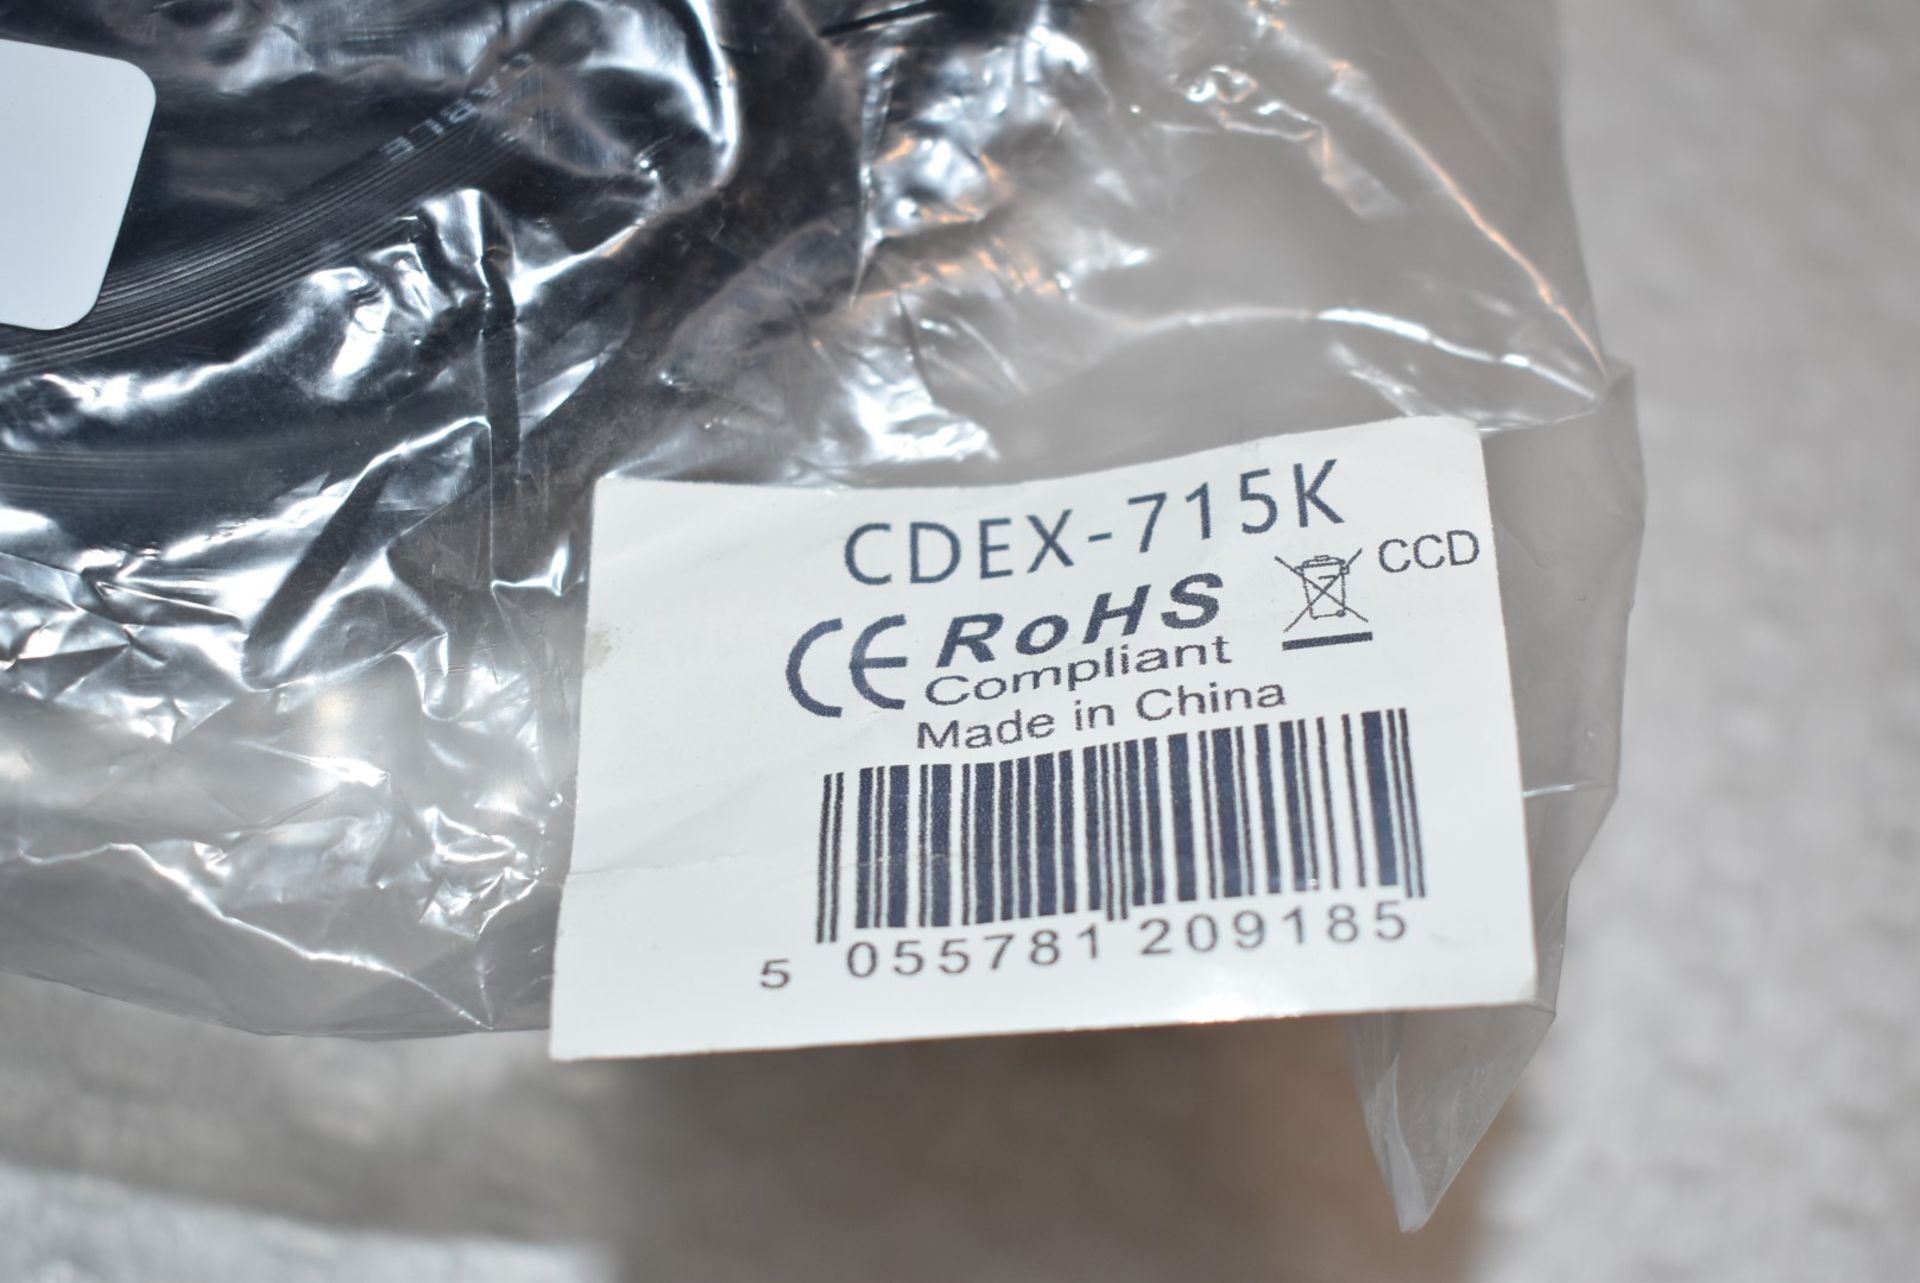 3 x CDEX 715K Cables Direct VGA Cables - 15 Meter Length - New in Packets - RRP £70 - Image 4 of 7